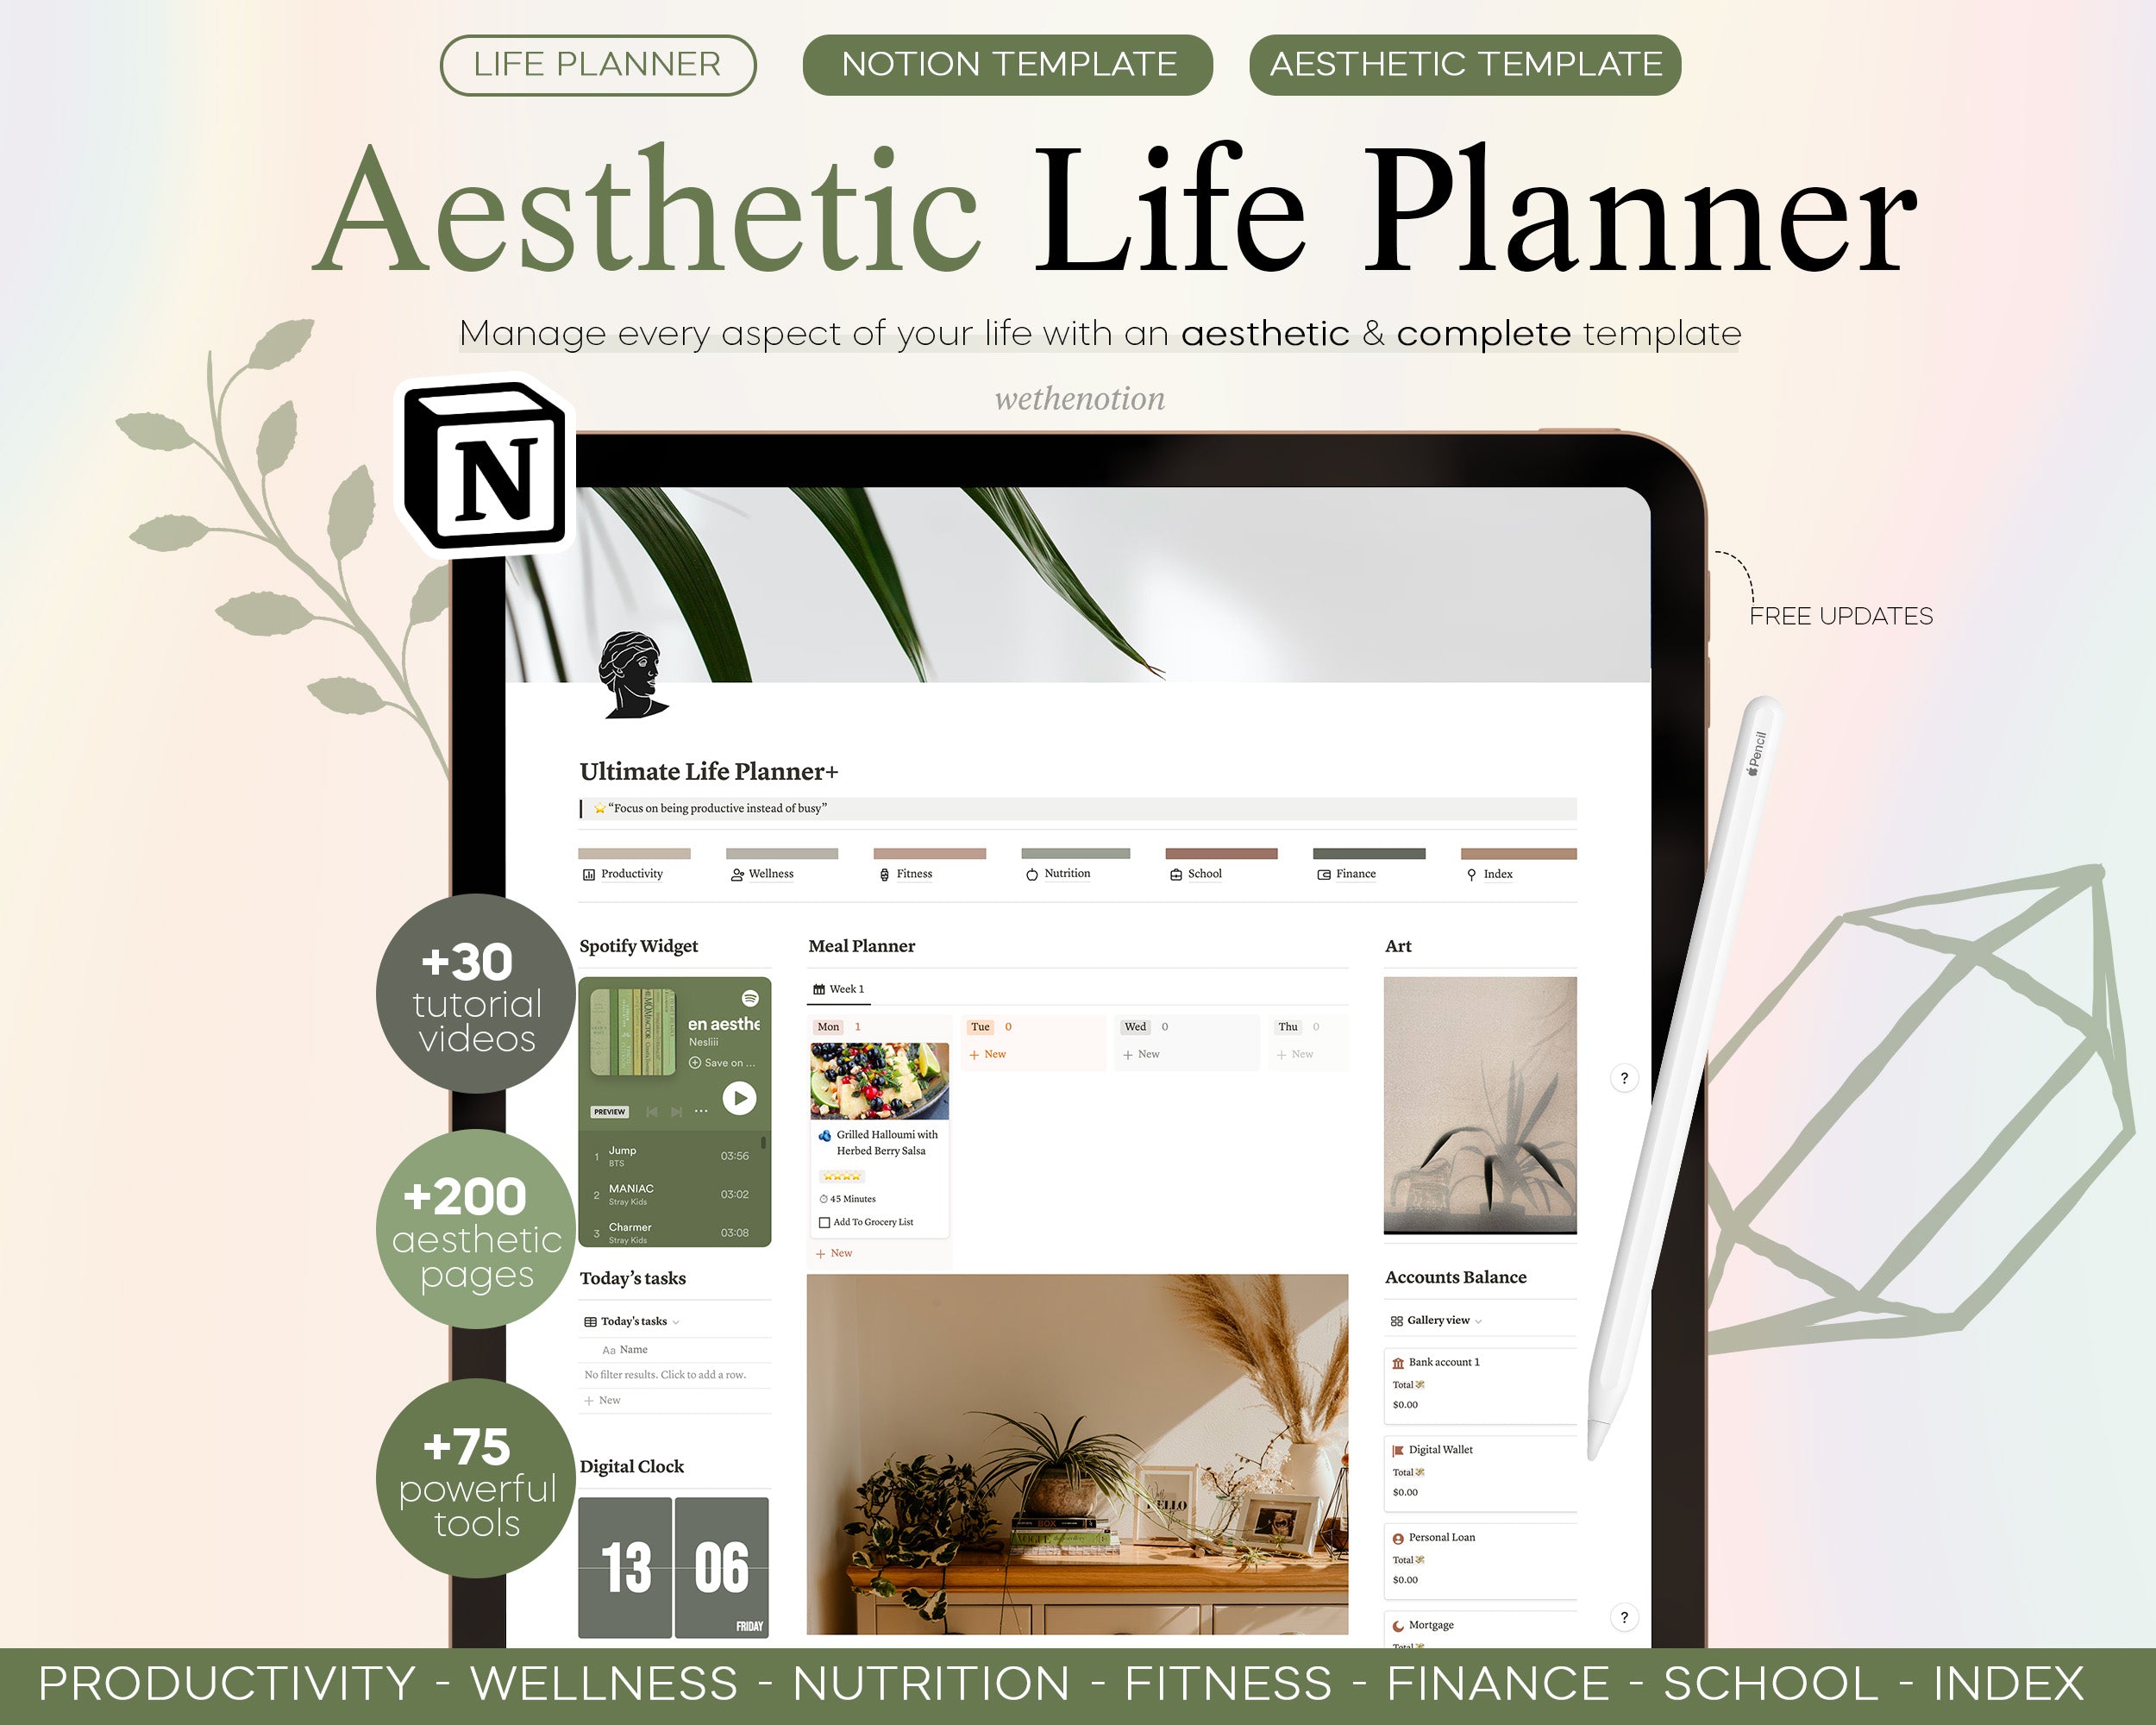 All in One Life Planner